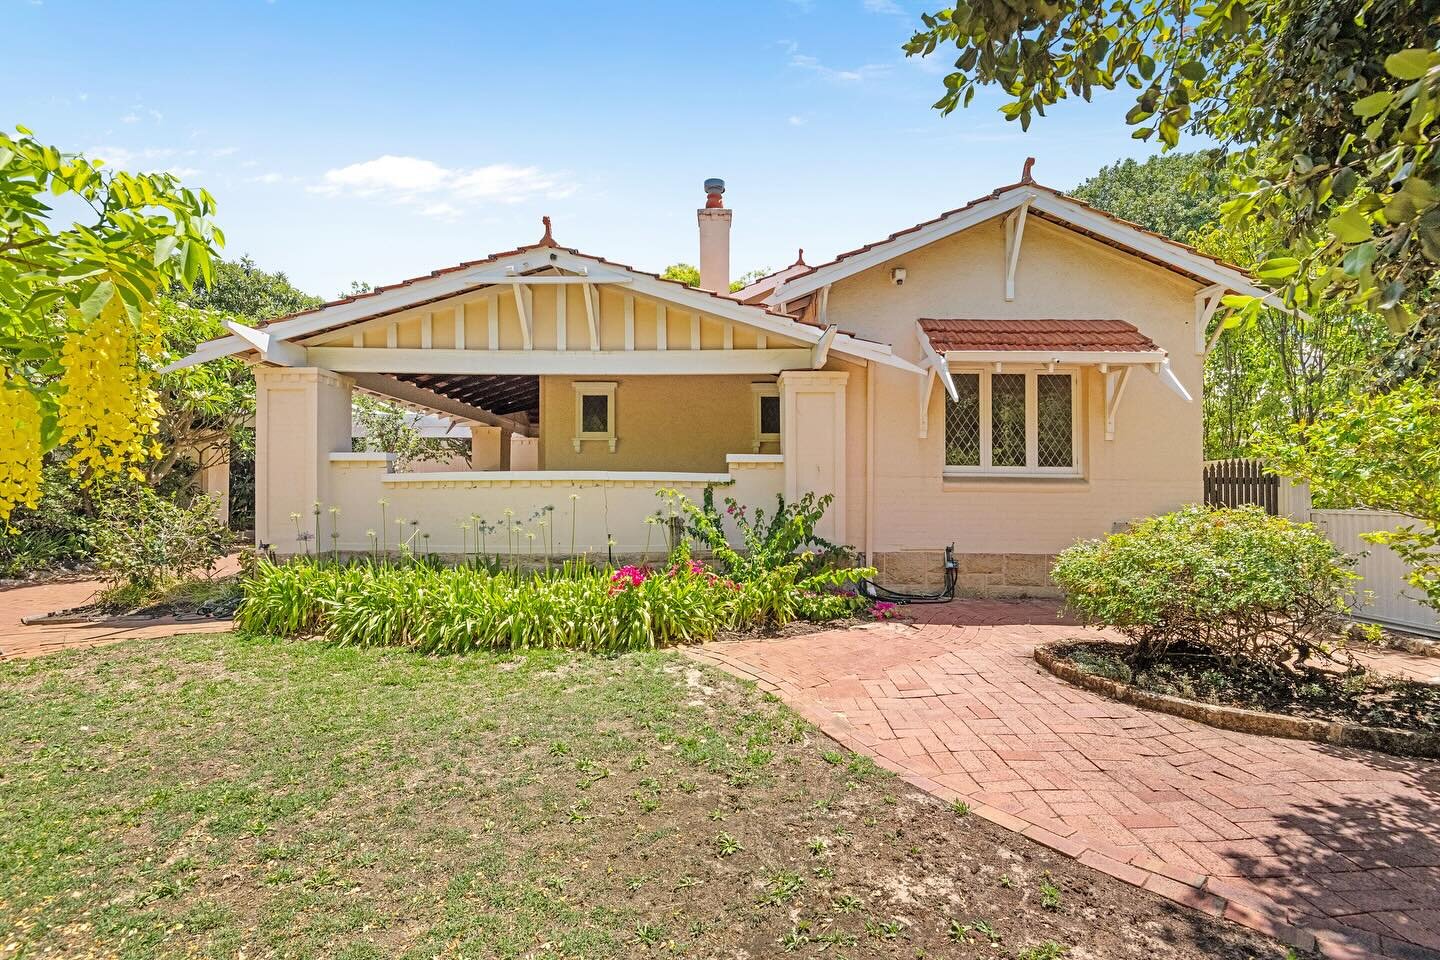 JUST LISTED 🌟 101 Bruce Street Nedlands. 

It&rsquo;s very much a case of &ldquo;old-world charm&rdquo; and &ldquo;new-world dreams&rdquo; here, as far as this expansive 814sqm (approx.) family-sized Nedlands block is concerned &ndash; currently pla